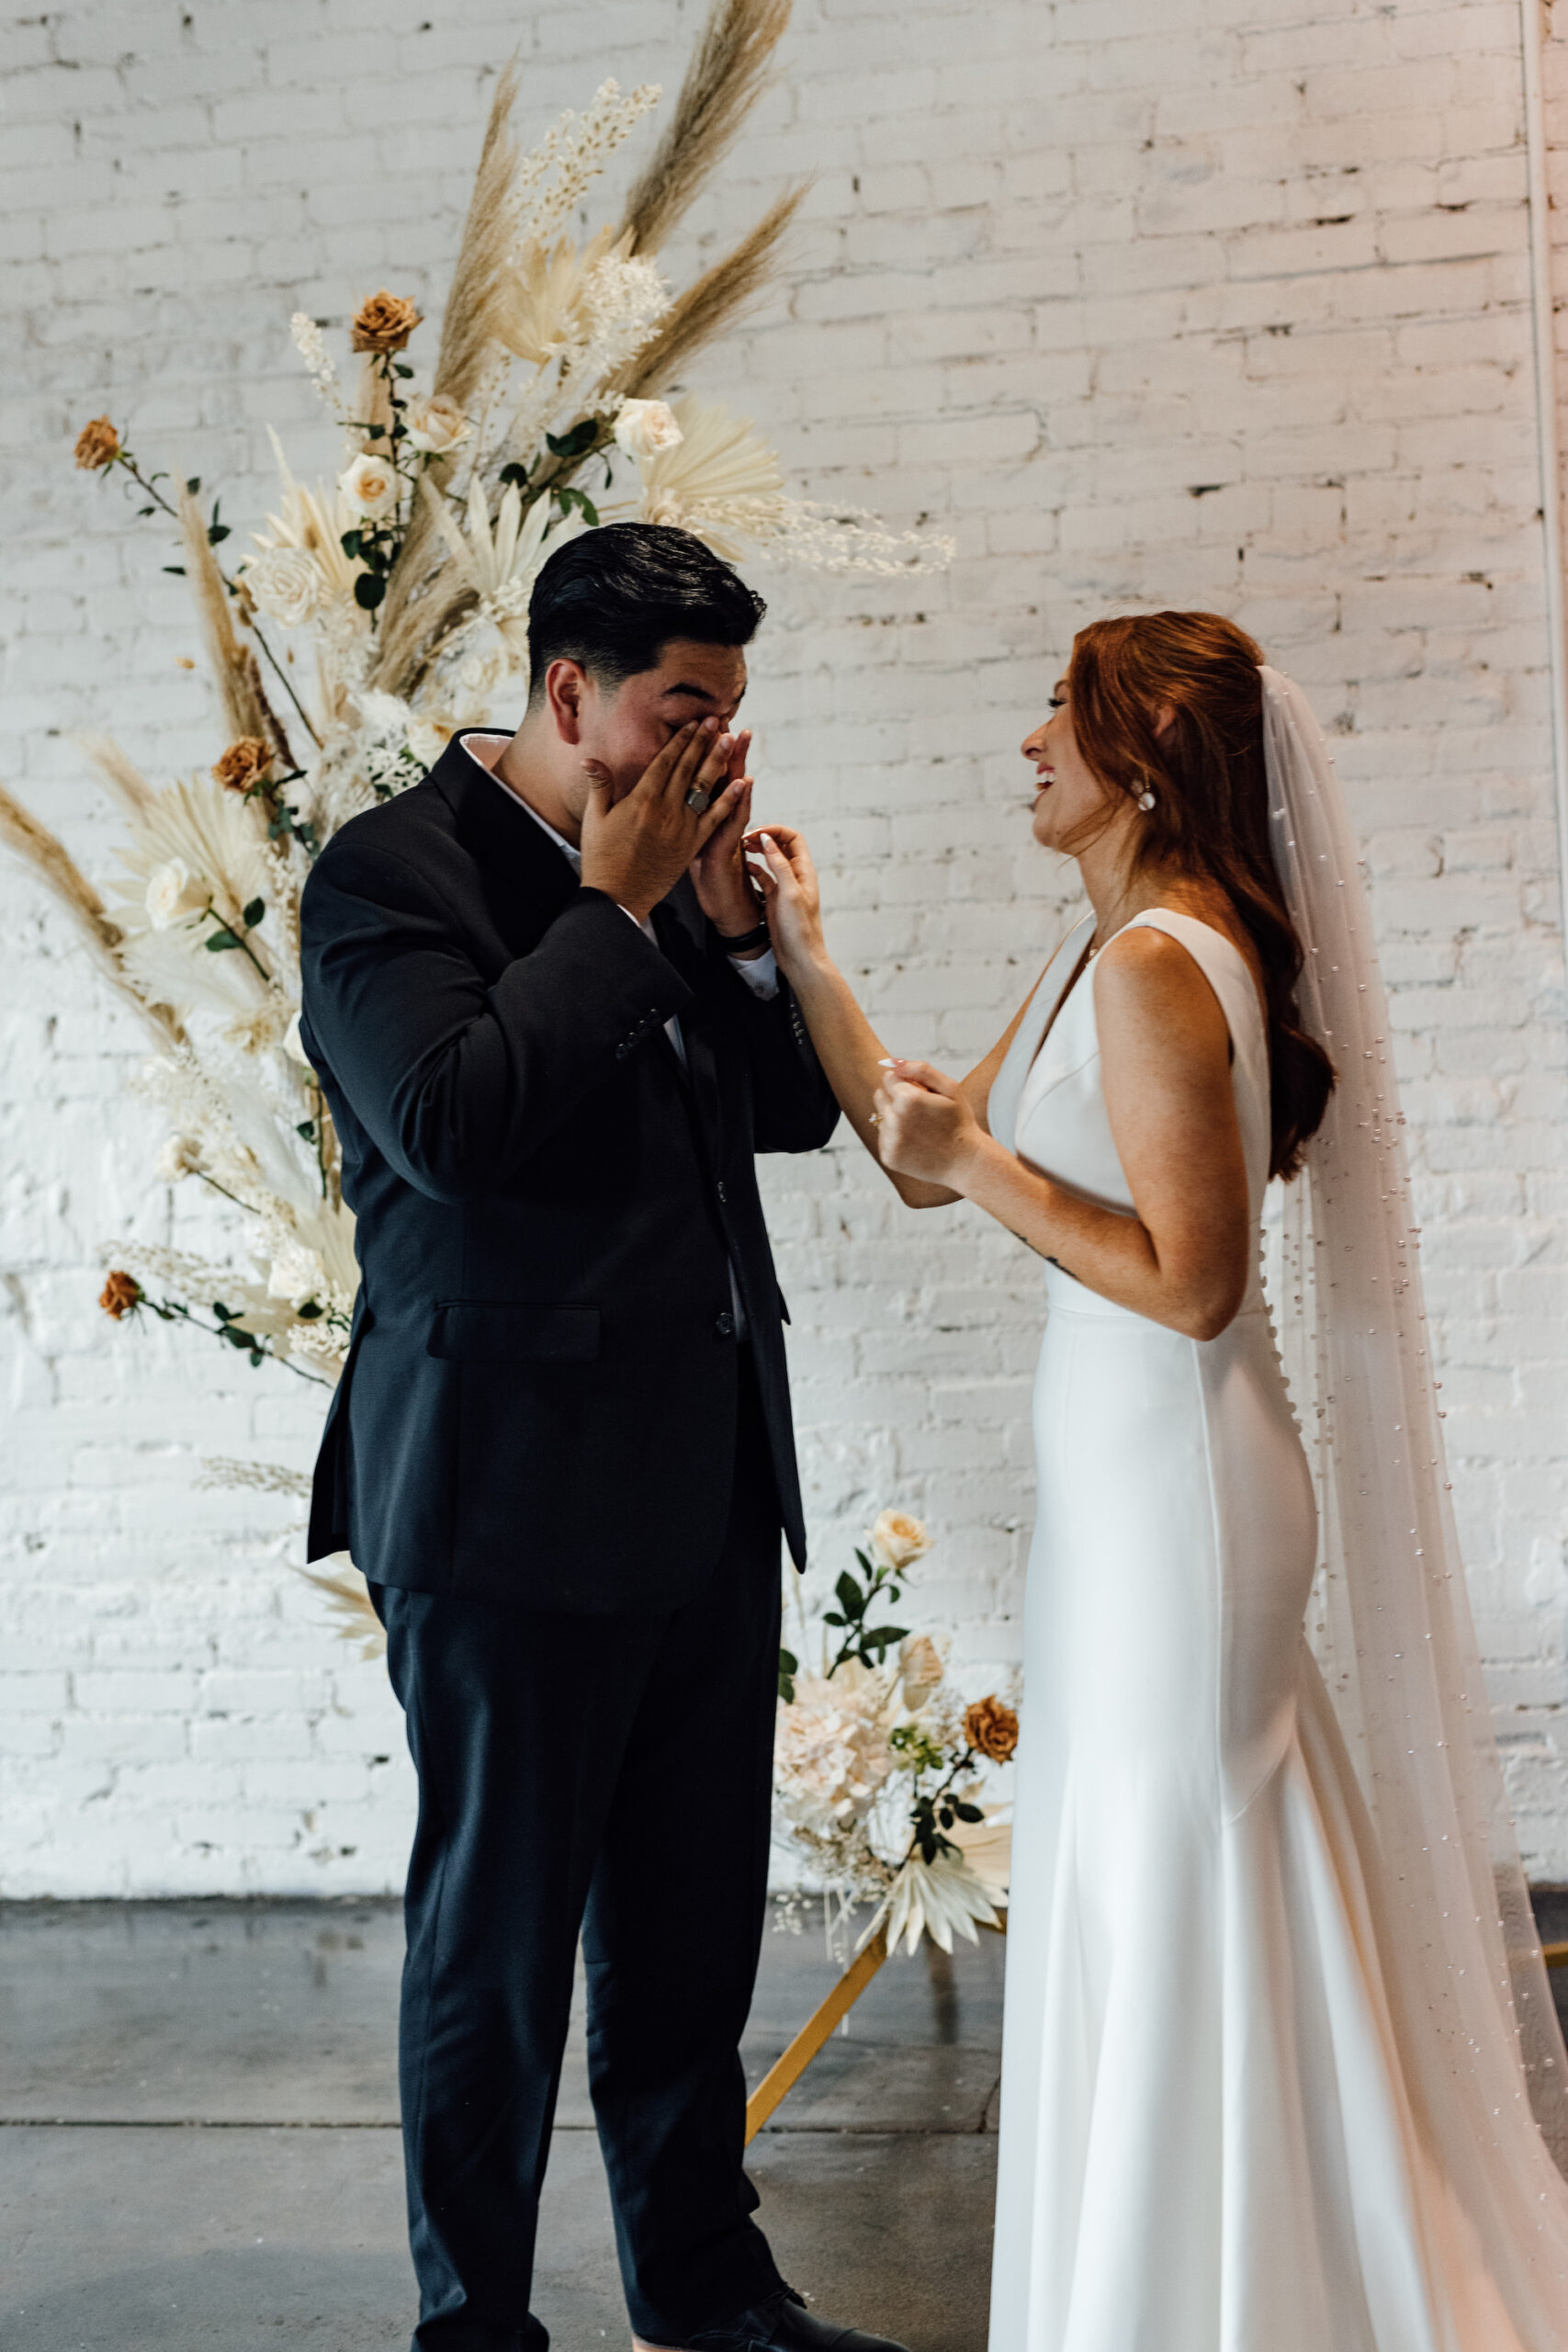 Emotional Bride and Groom First Look Wedding Portrait | Indoor Wedding Ceremony | Asymmetrical Round Boho Arch with Boho Pampas Grass White Palm Frond Floral Arrangements | Tampa Bay Wedding Venue Haus 820